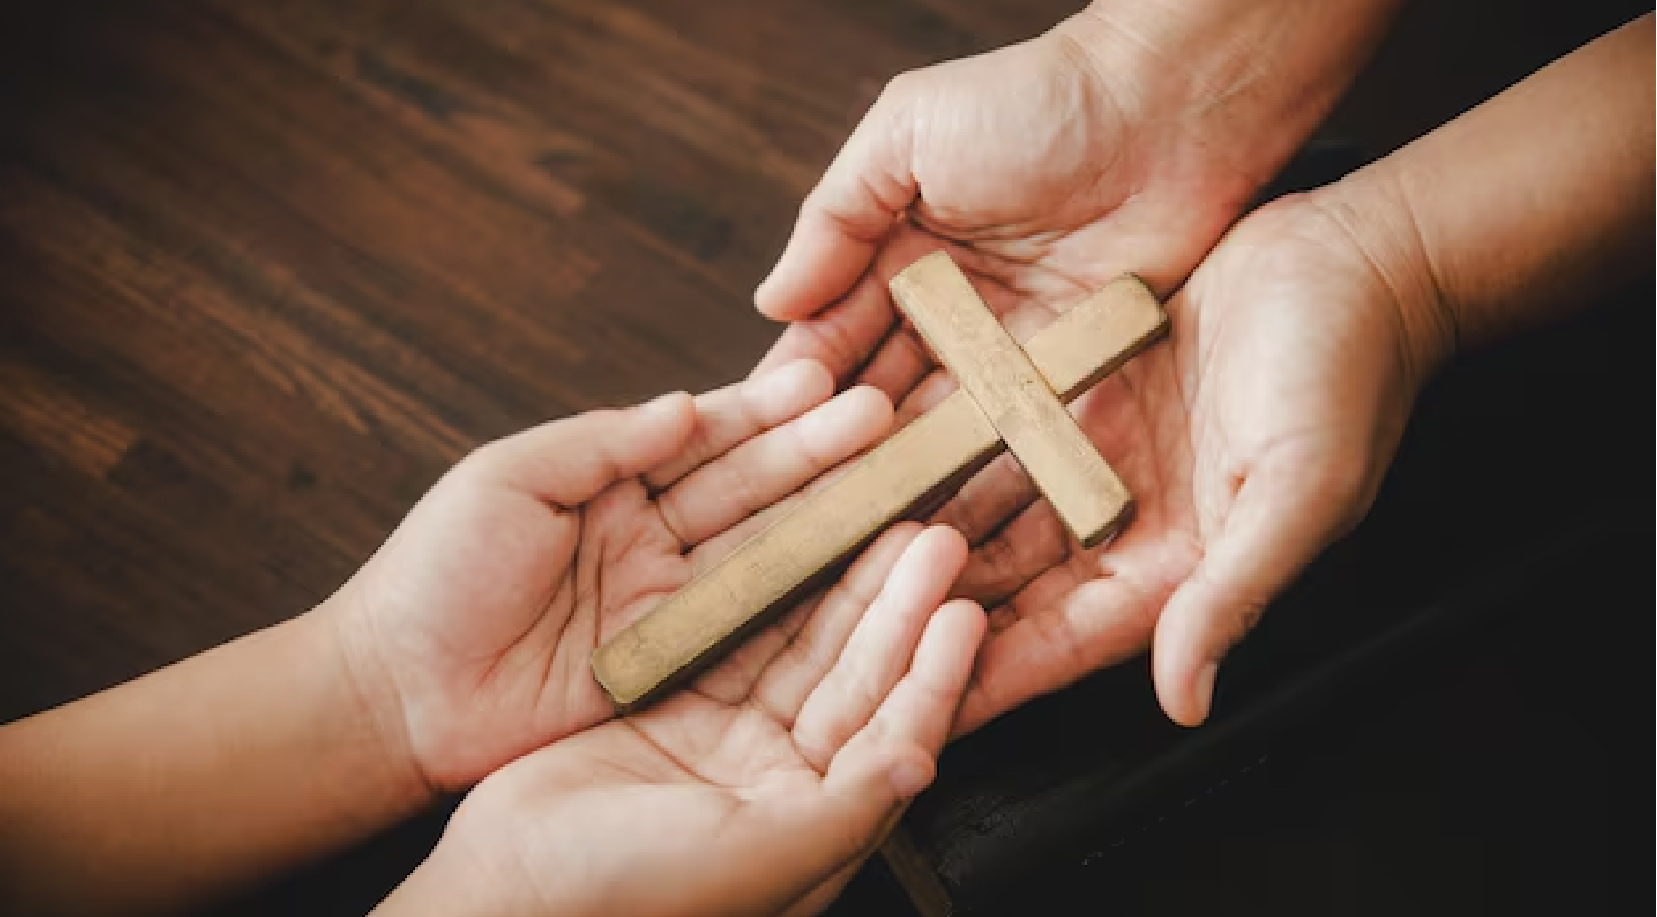 men have shown lower levels of religious commitment compared with women